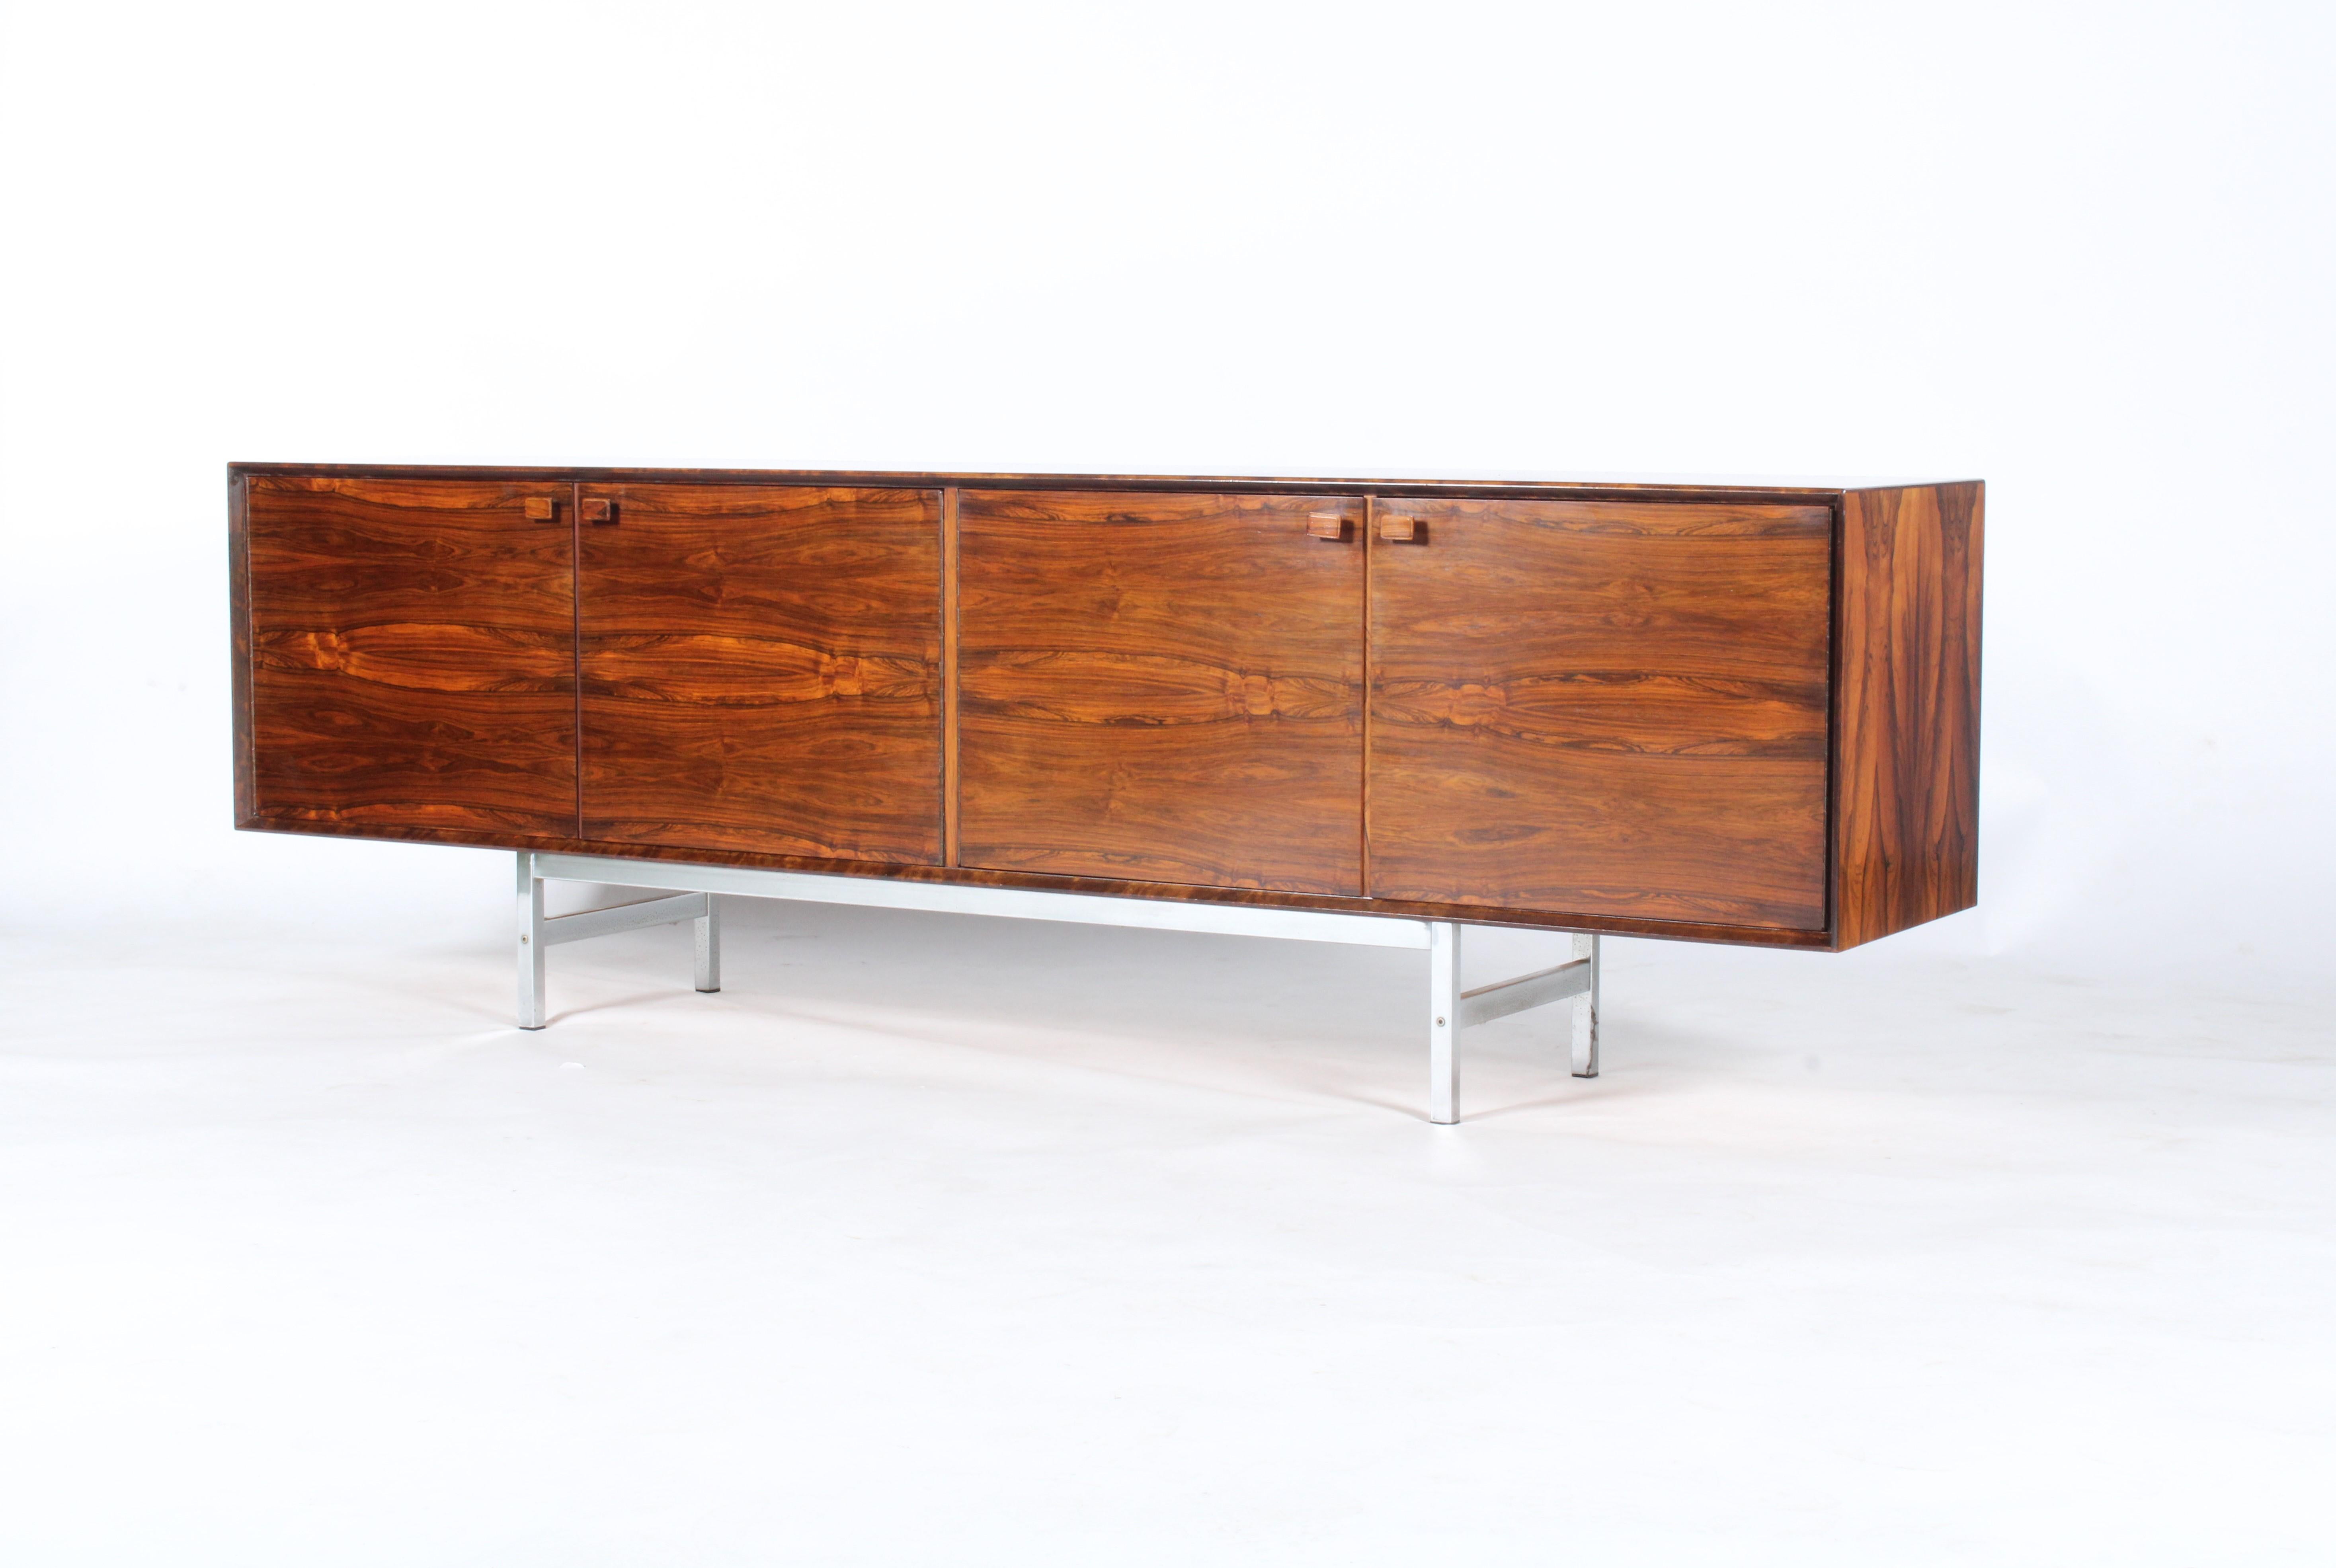 Polished Exceptional Scandinavian  Rio Rosewood Sideboard By Fredrik A Kayser For Sale